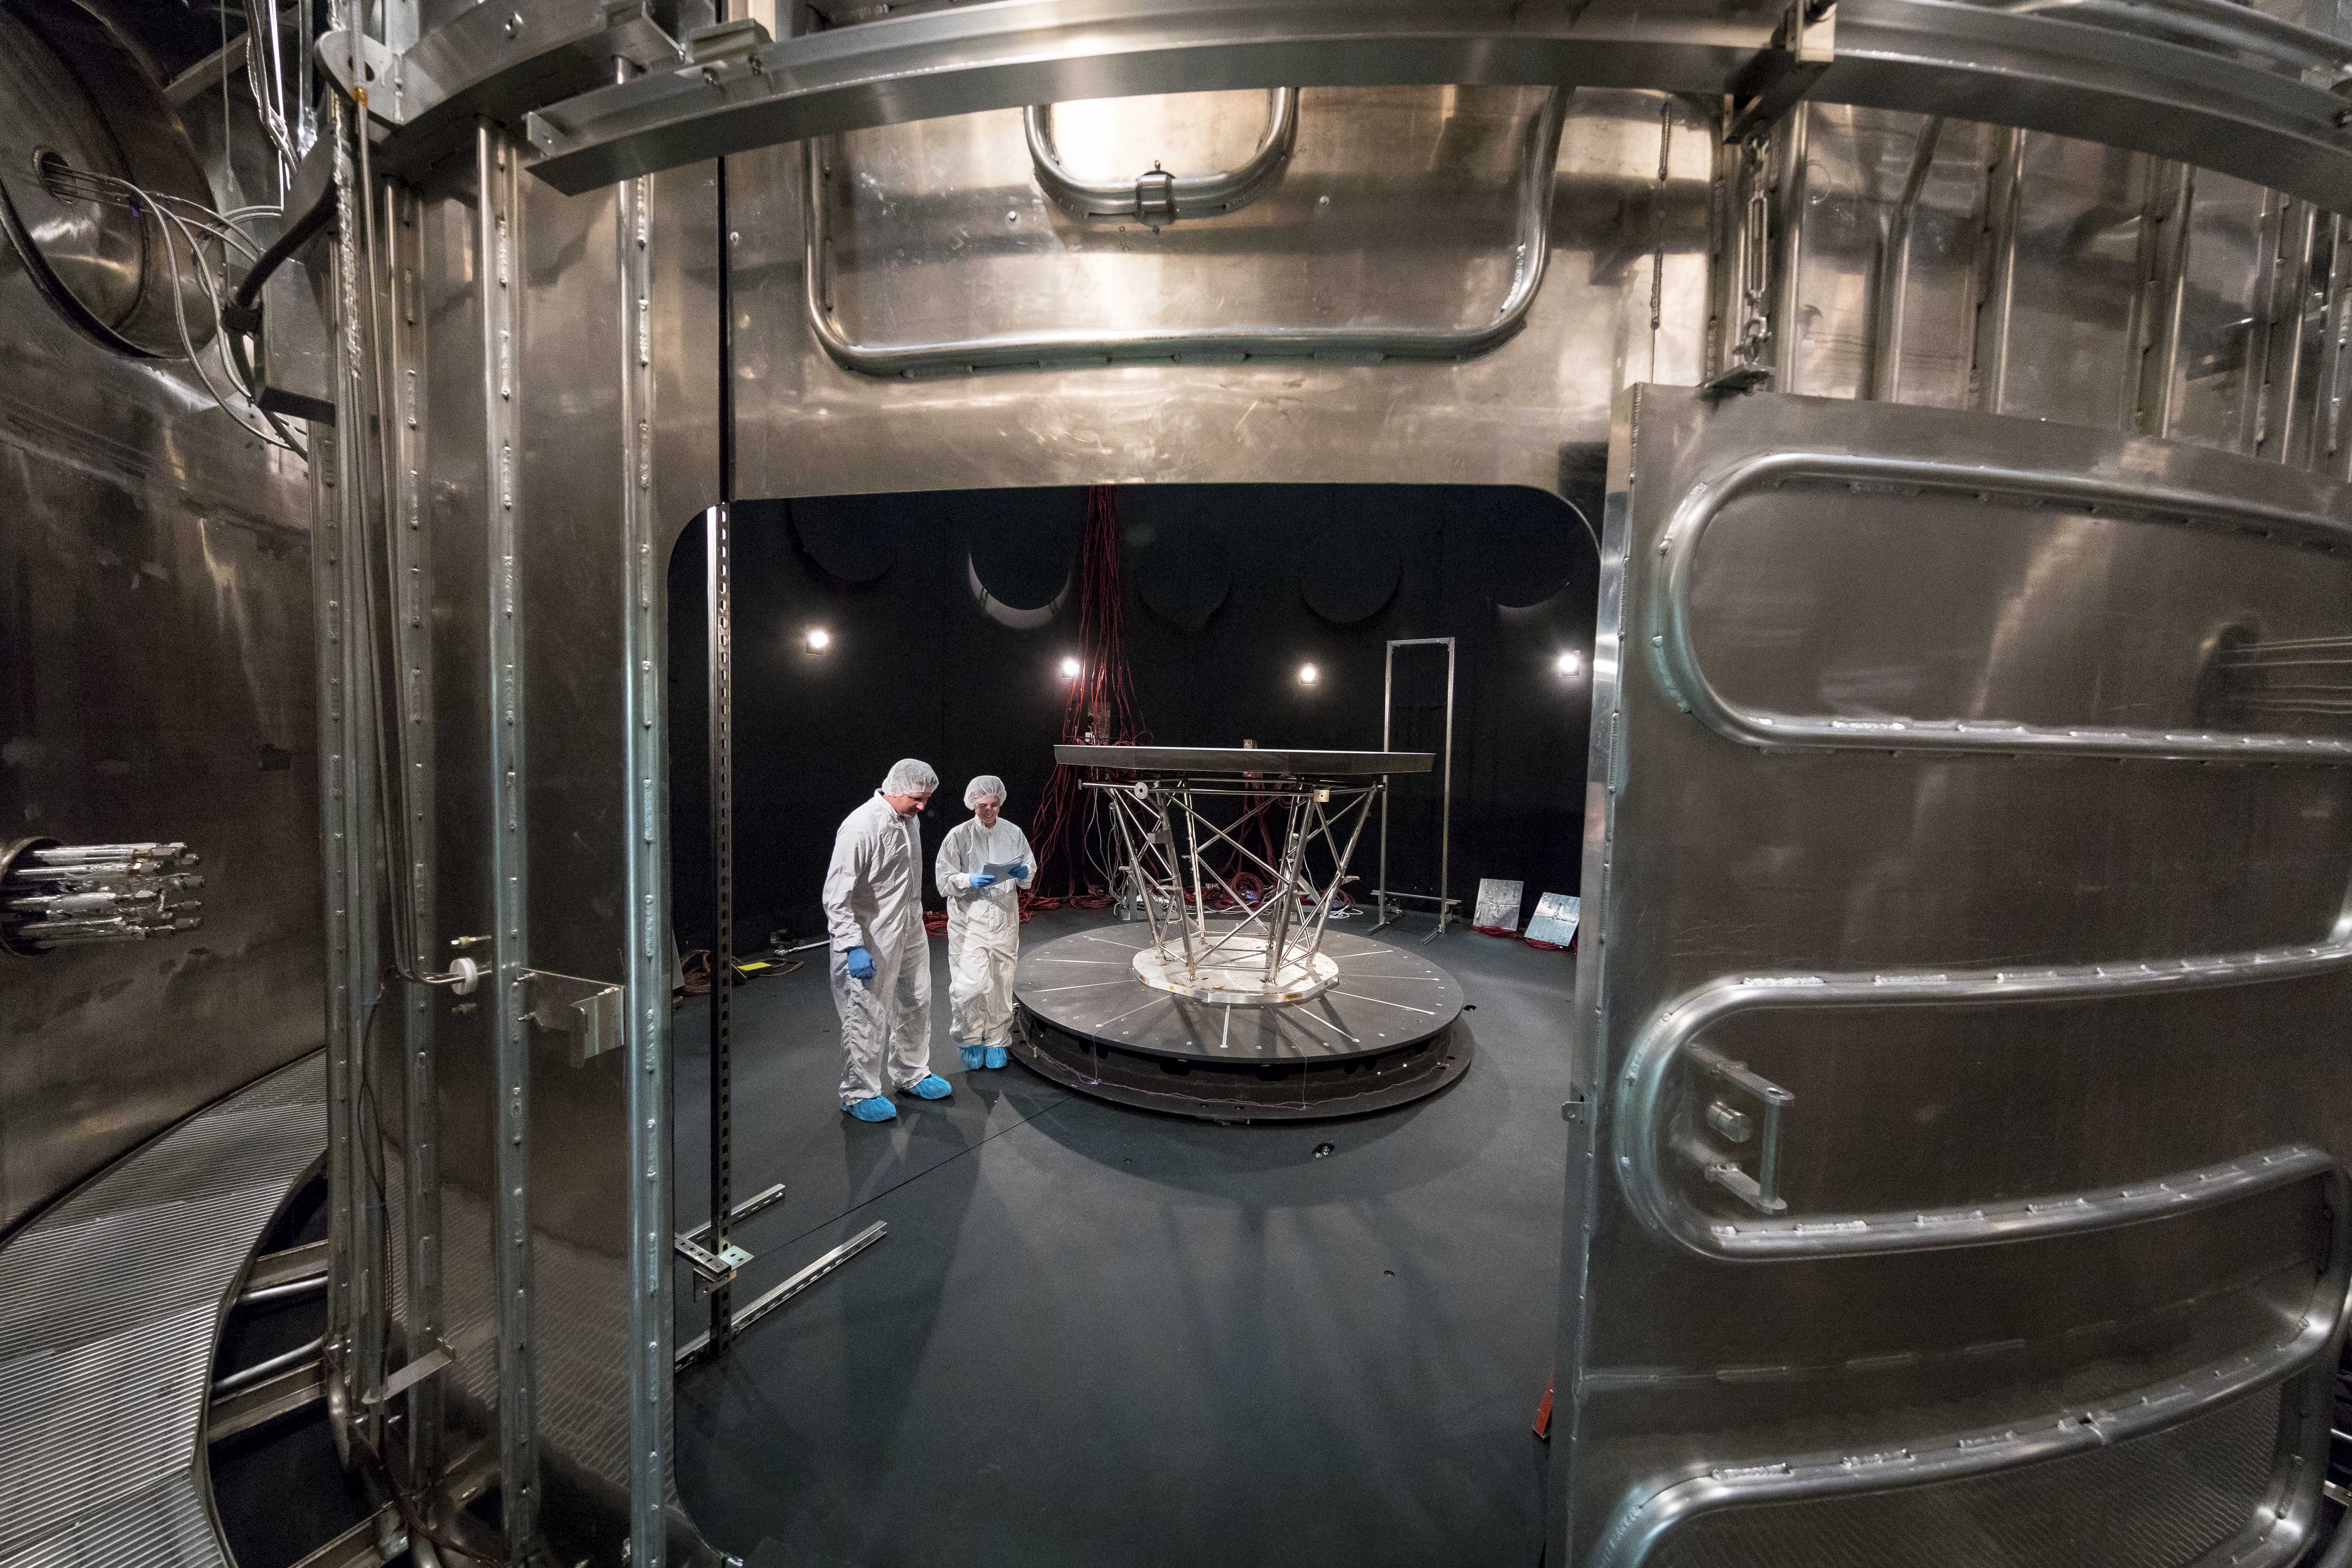 Parker Solar Probe's Thermal Protection System (TPS) - the heat shield that will protect the spacecraft from the Sun's intense heat - is lowered into the Thermal Vacuum Chamber at NASA's Goddard Space Flight Center in preparation for environmental testing. 